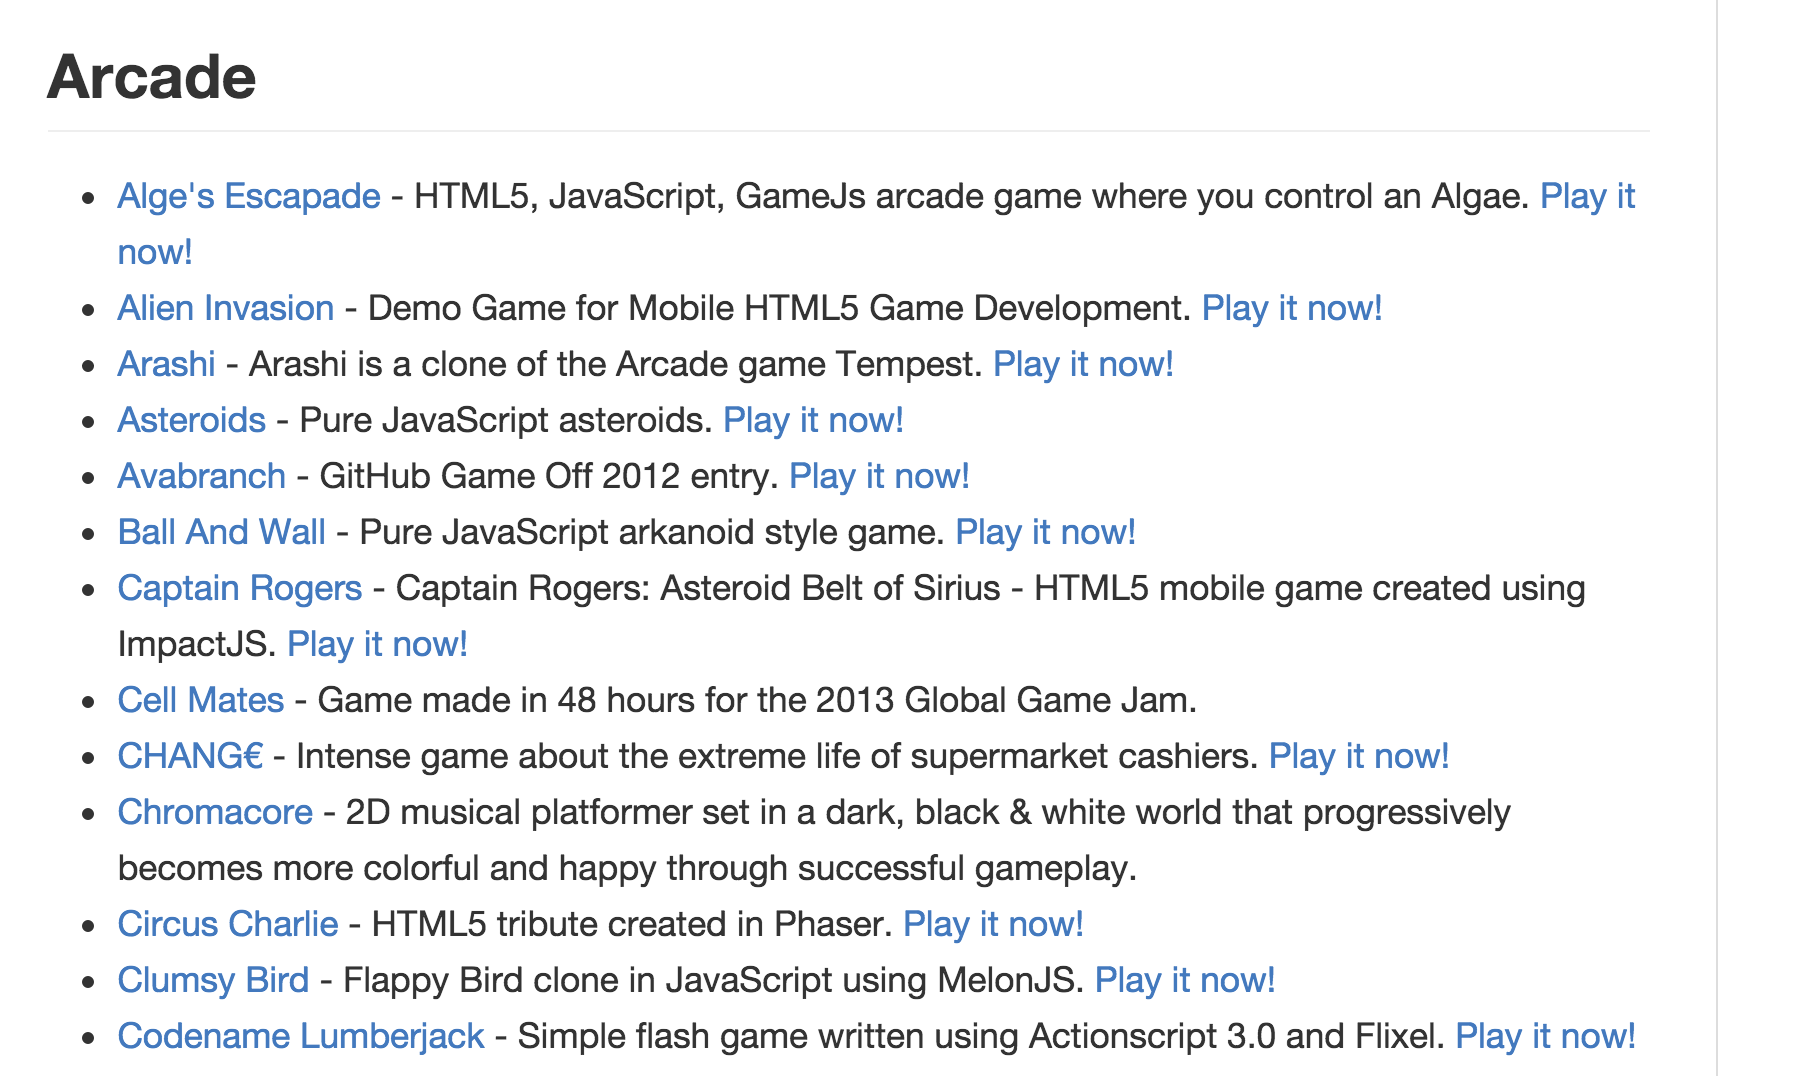 GitHub - leereilly/games: :video_game: A list of popular/awesome